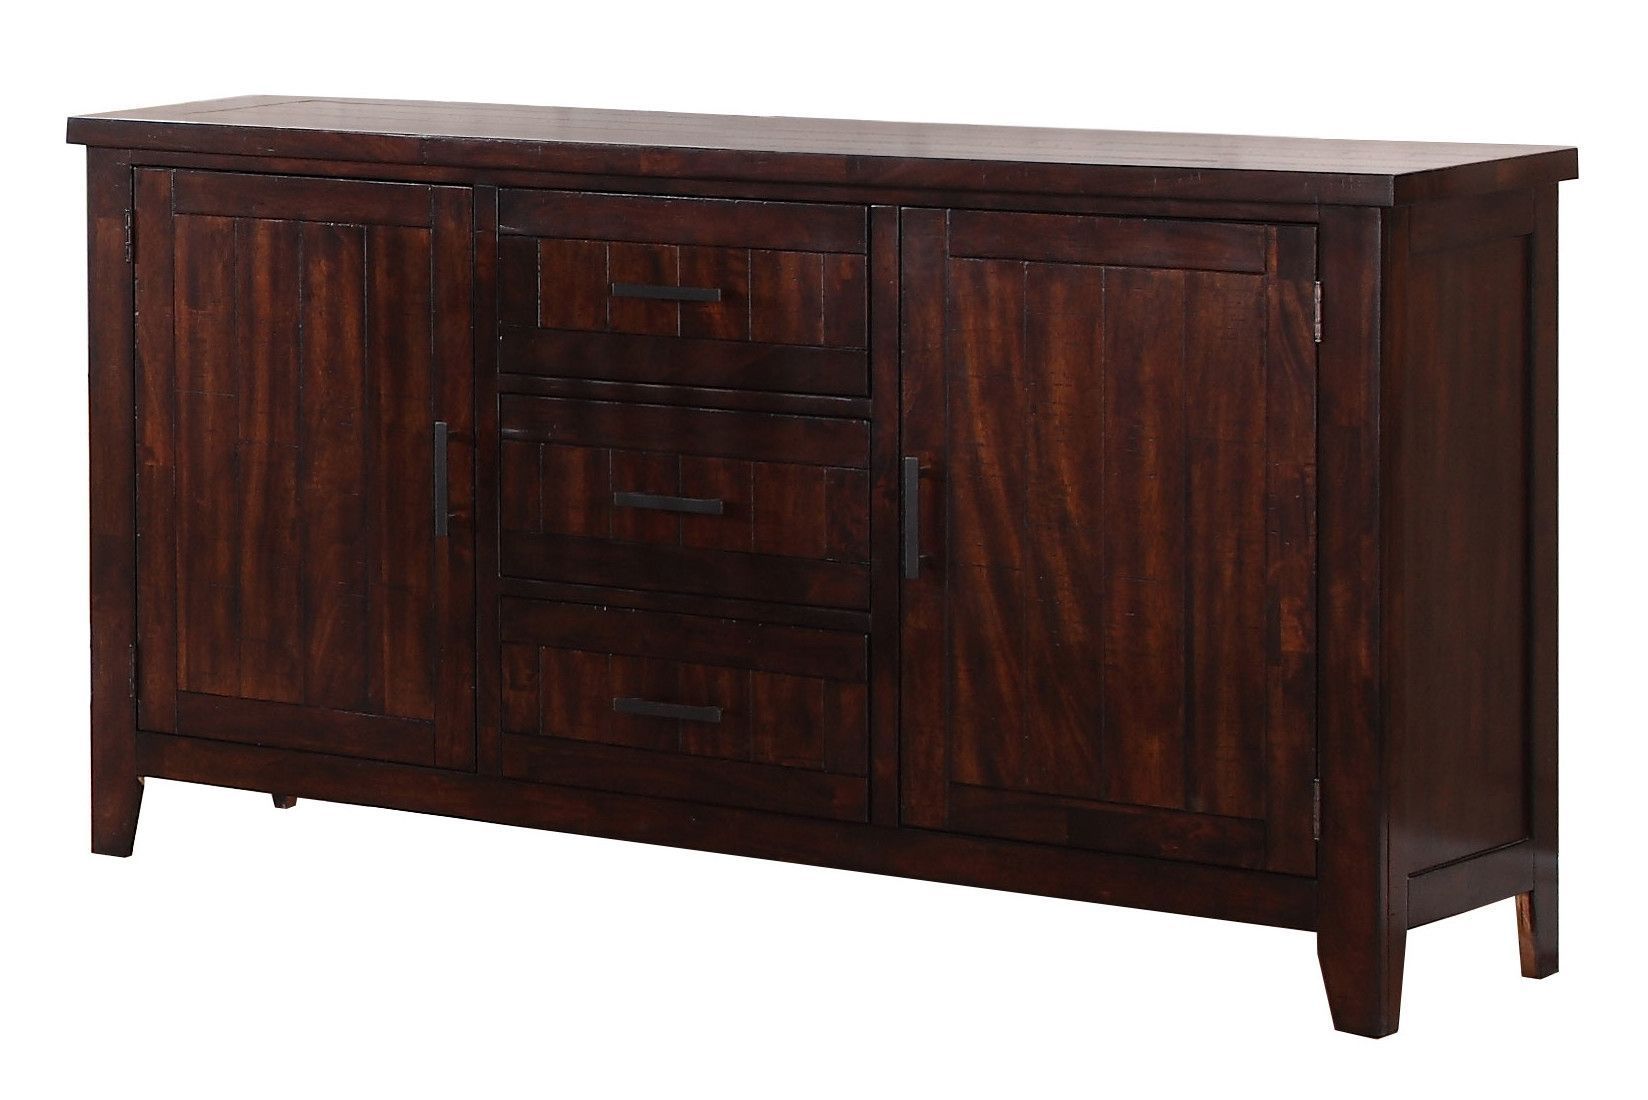 Mannox Sideboard | Products | Sideboard, Dining Room, Furniture With Regard To Seiling Sideboards (Photo 4 of 30)